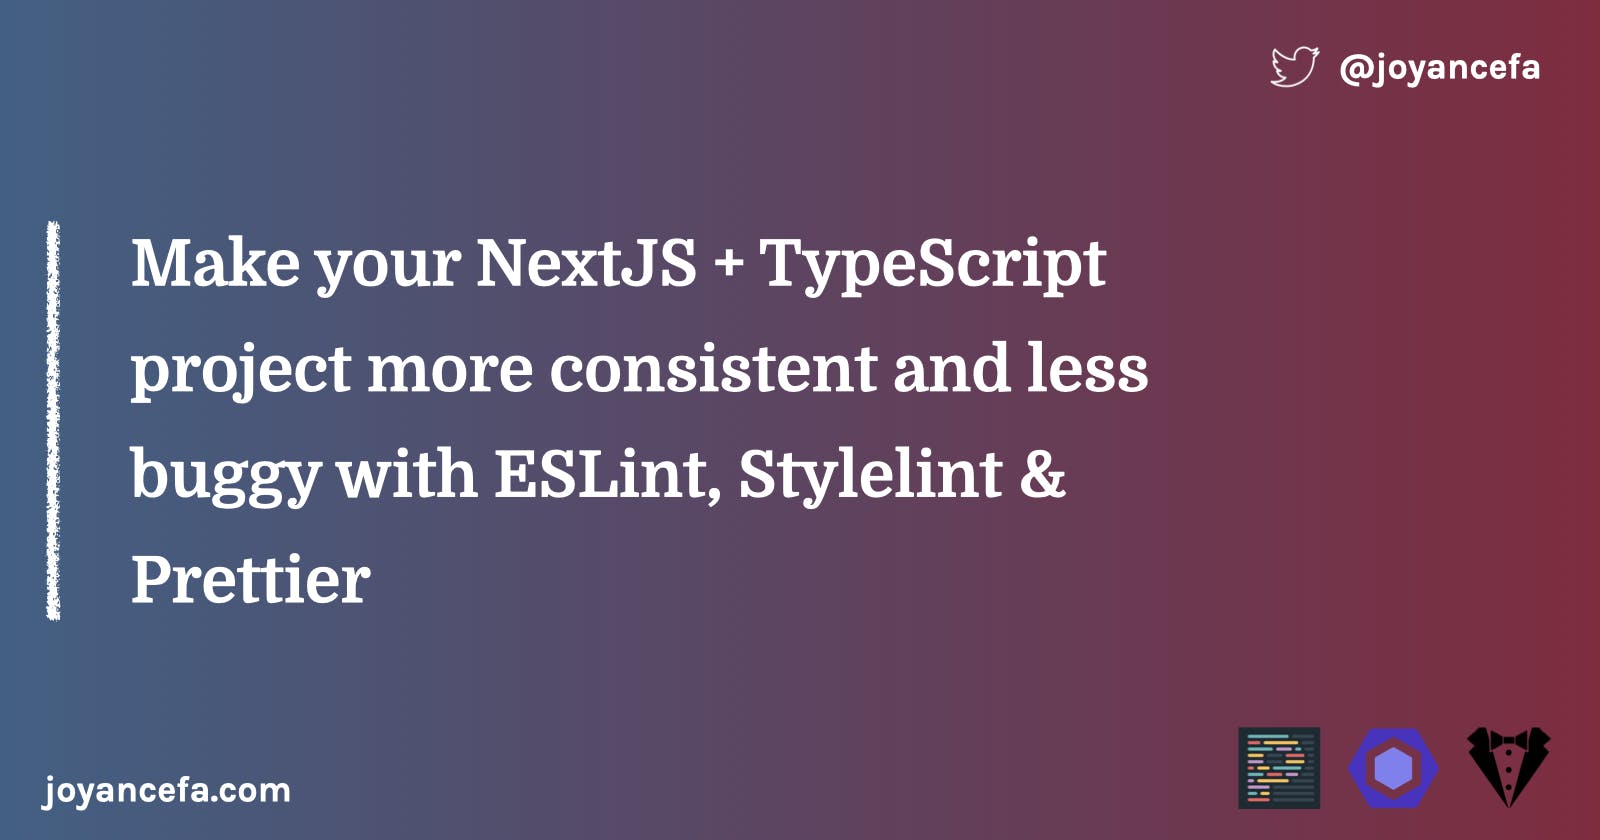 How to make your NextJS + TypeScript project more consistent and less buggy with ESLint, Stylelint & Prettier